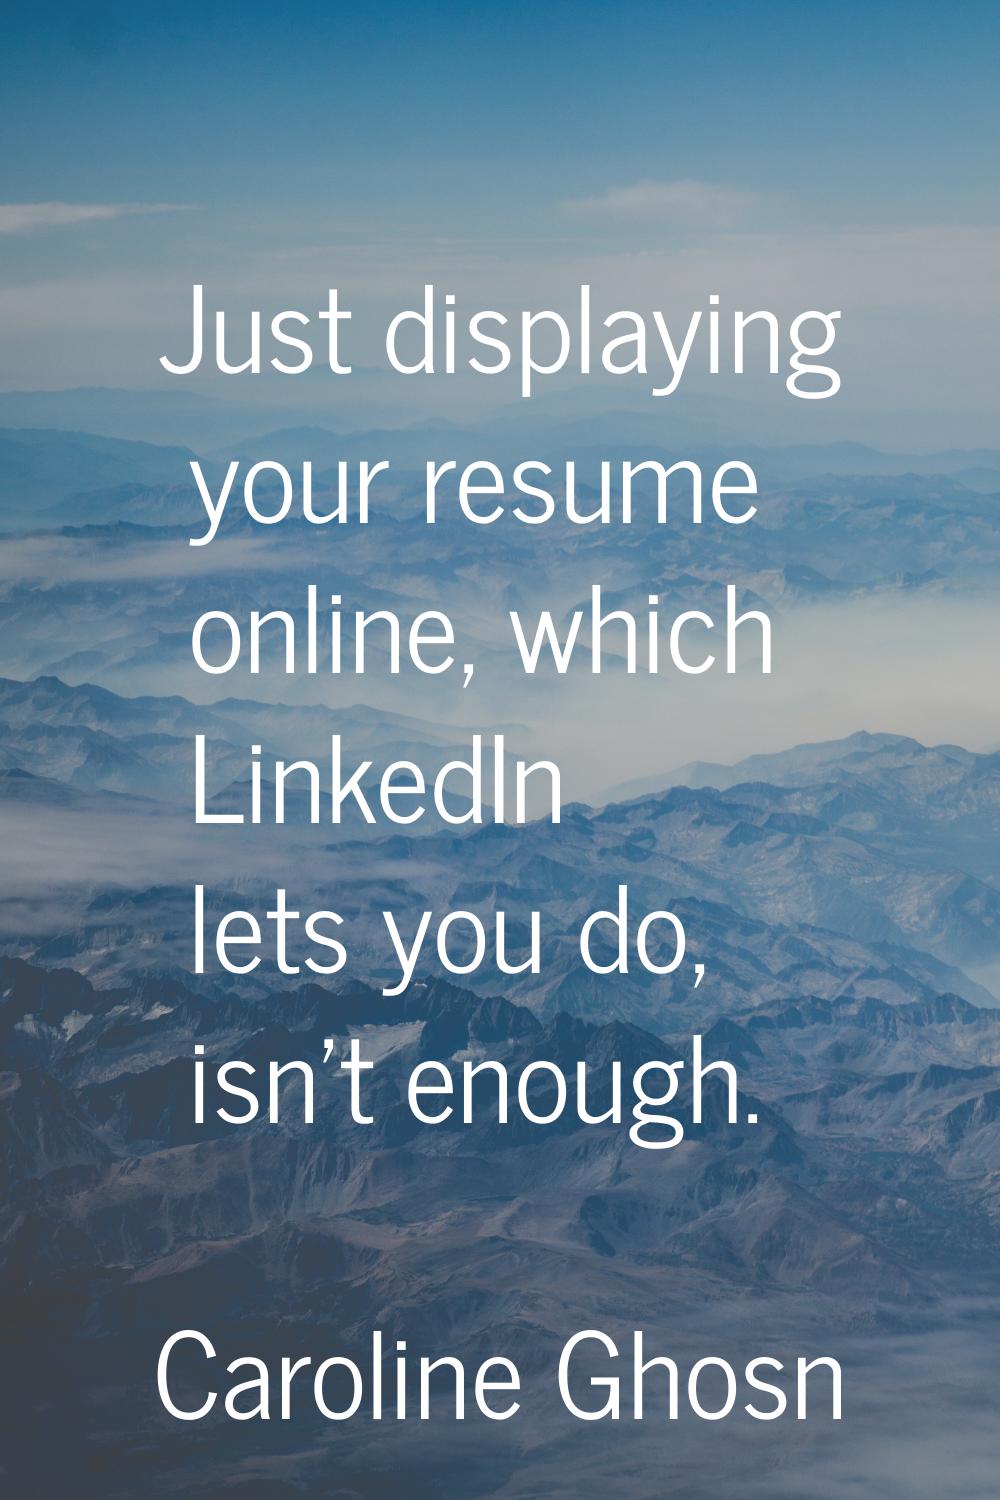 Just displaying your resume online, which LinkedIn lets you do, isn't enough.